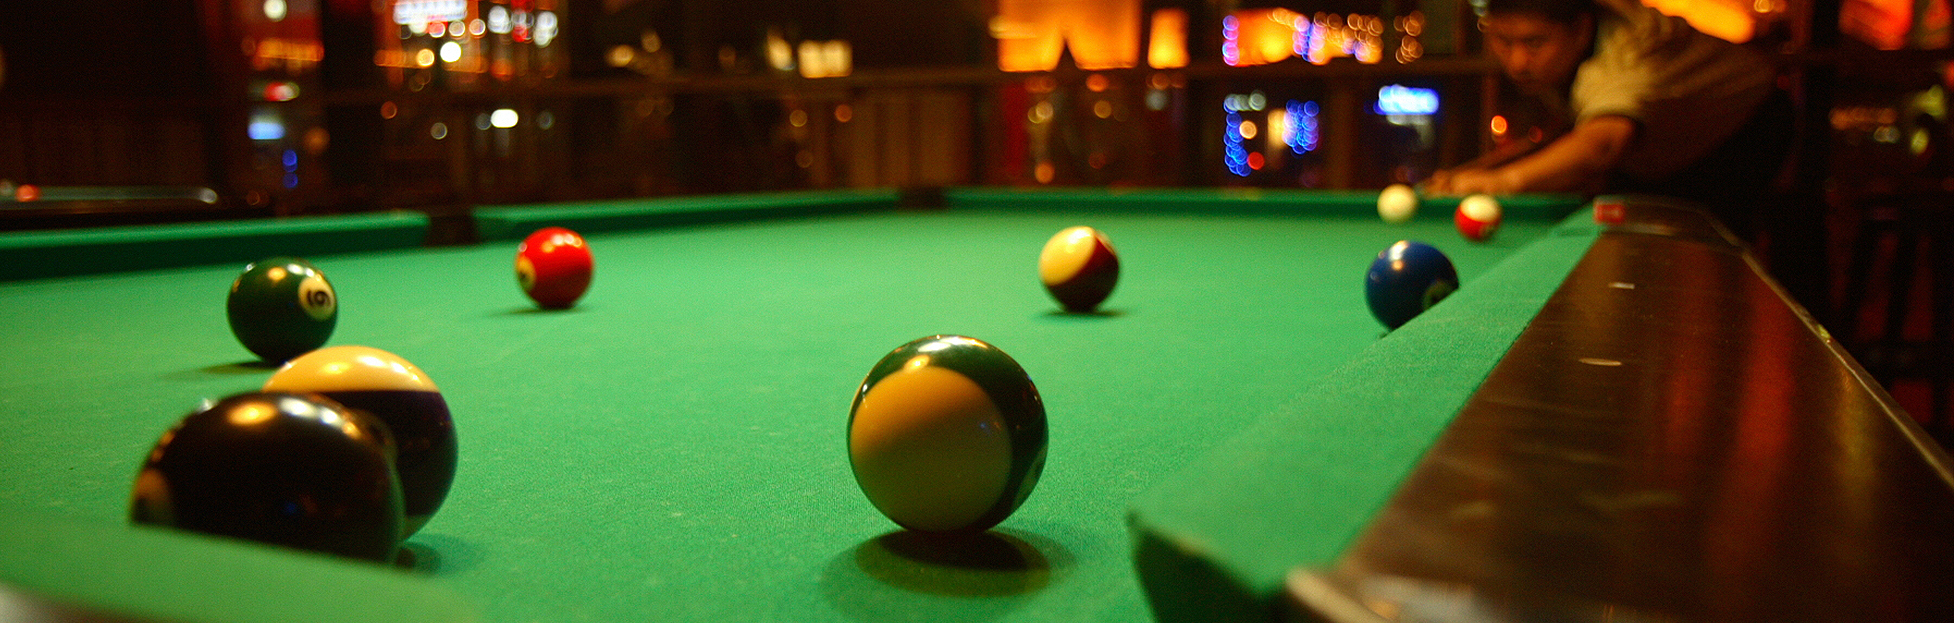 <p>Pool Tables, Game Tables & Accessories </p>
